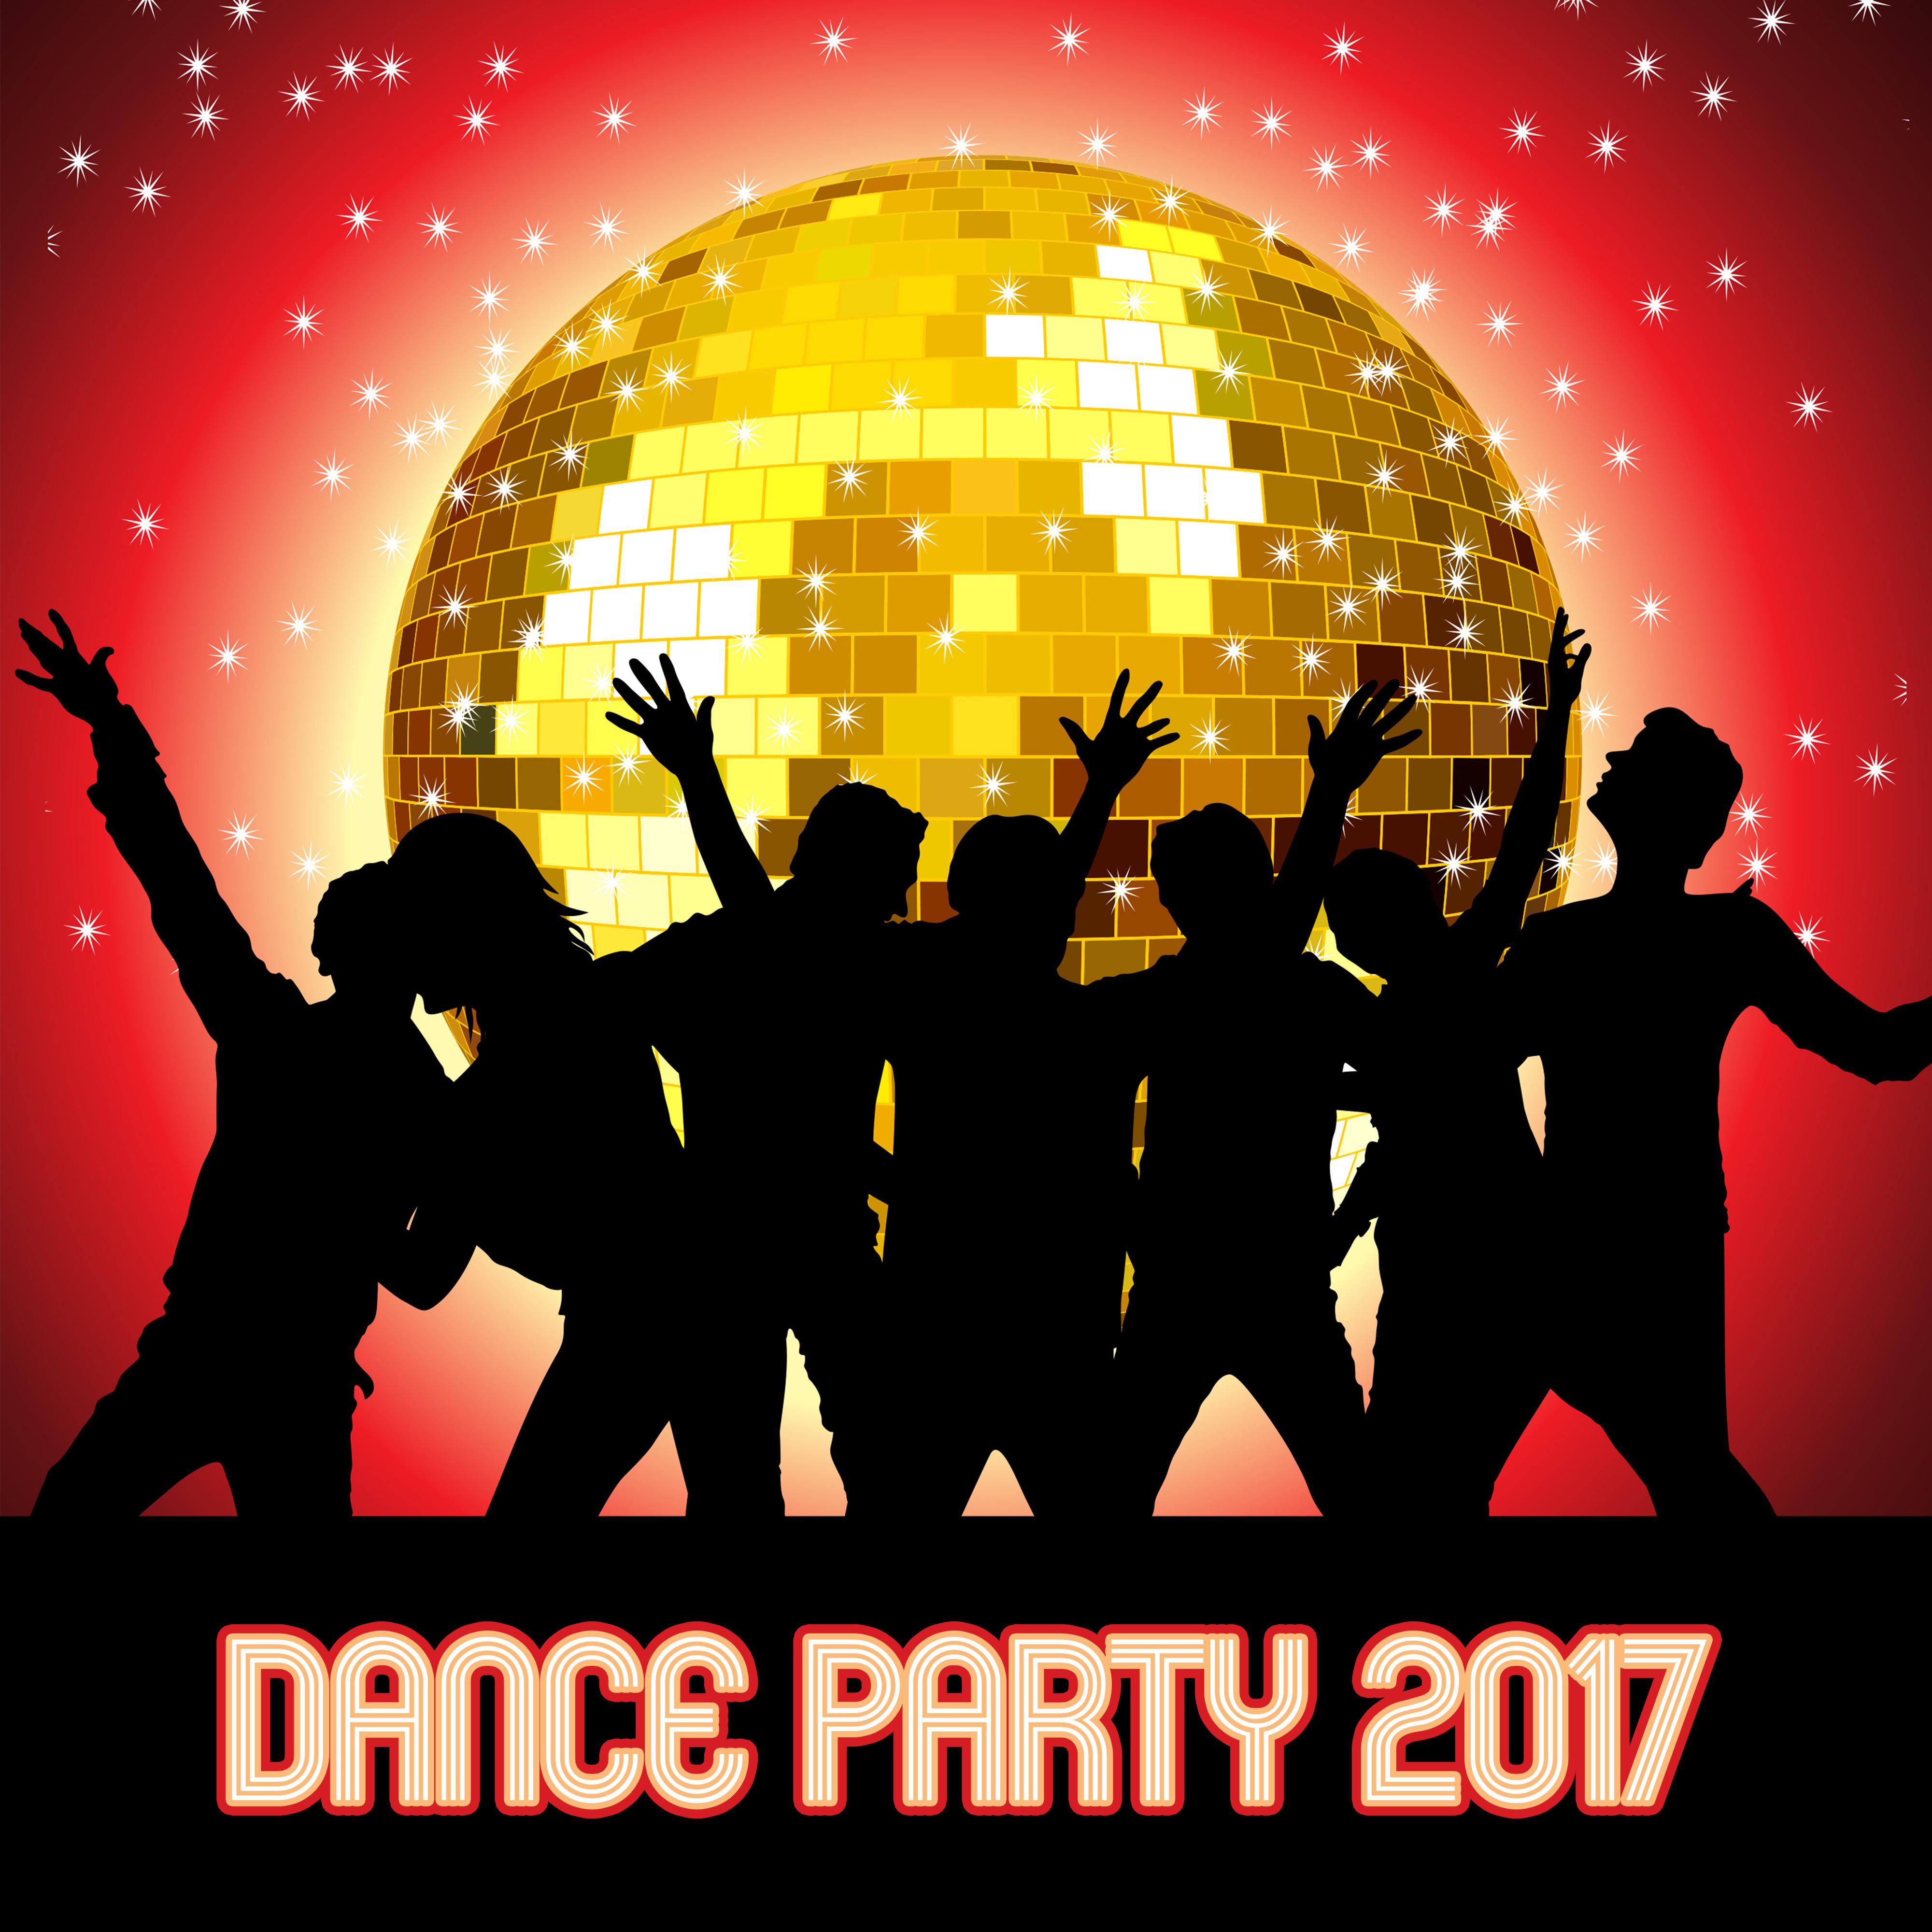 Dance Party 2017 – Holiday Chill Out Music, Summertime, Ibiza Dance Party, *** Music, Sensual Vibes, Dancefloor, Ambient Summer